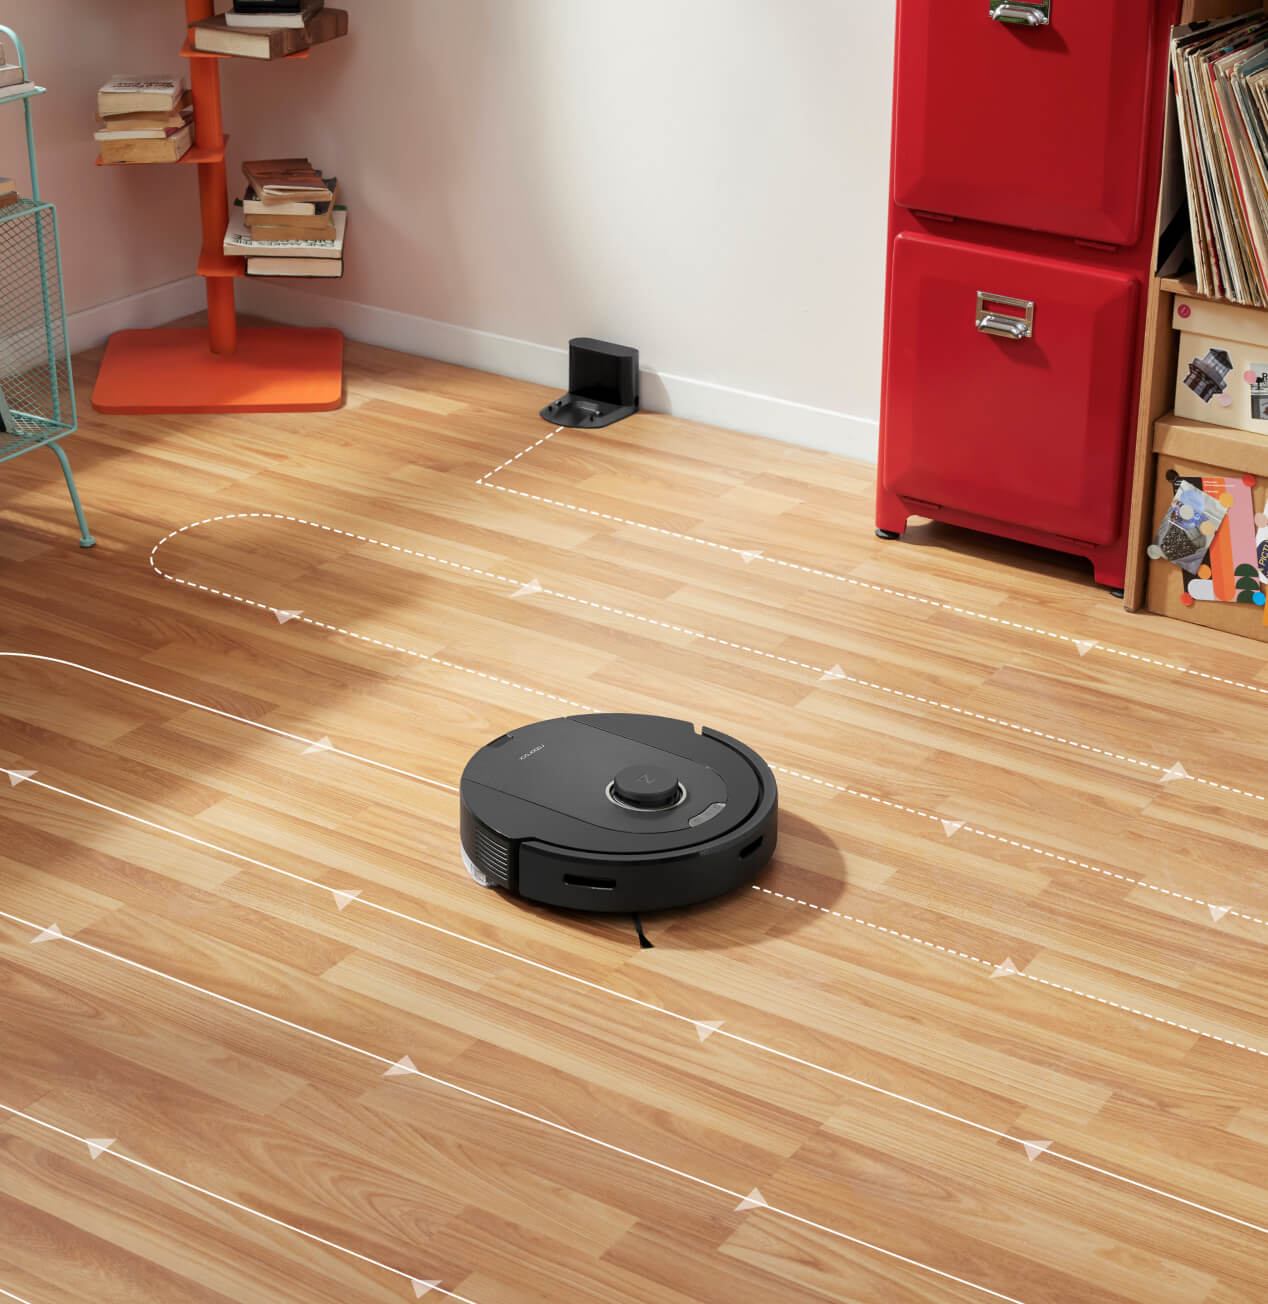 Enhance your cleaning and simplify your life with Roborock Q5 Pro+ and Q8  Max+ robot vacuums (Up to $220 off) - 9to5Mac